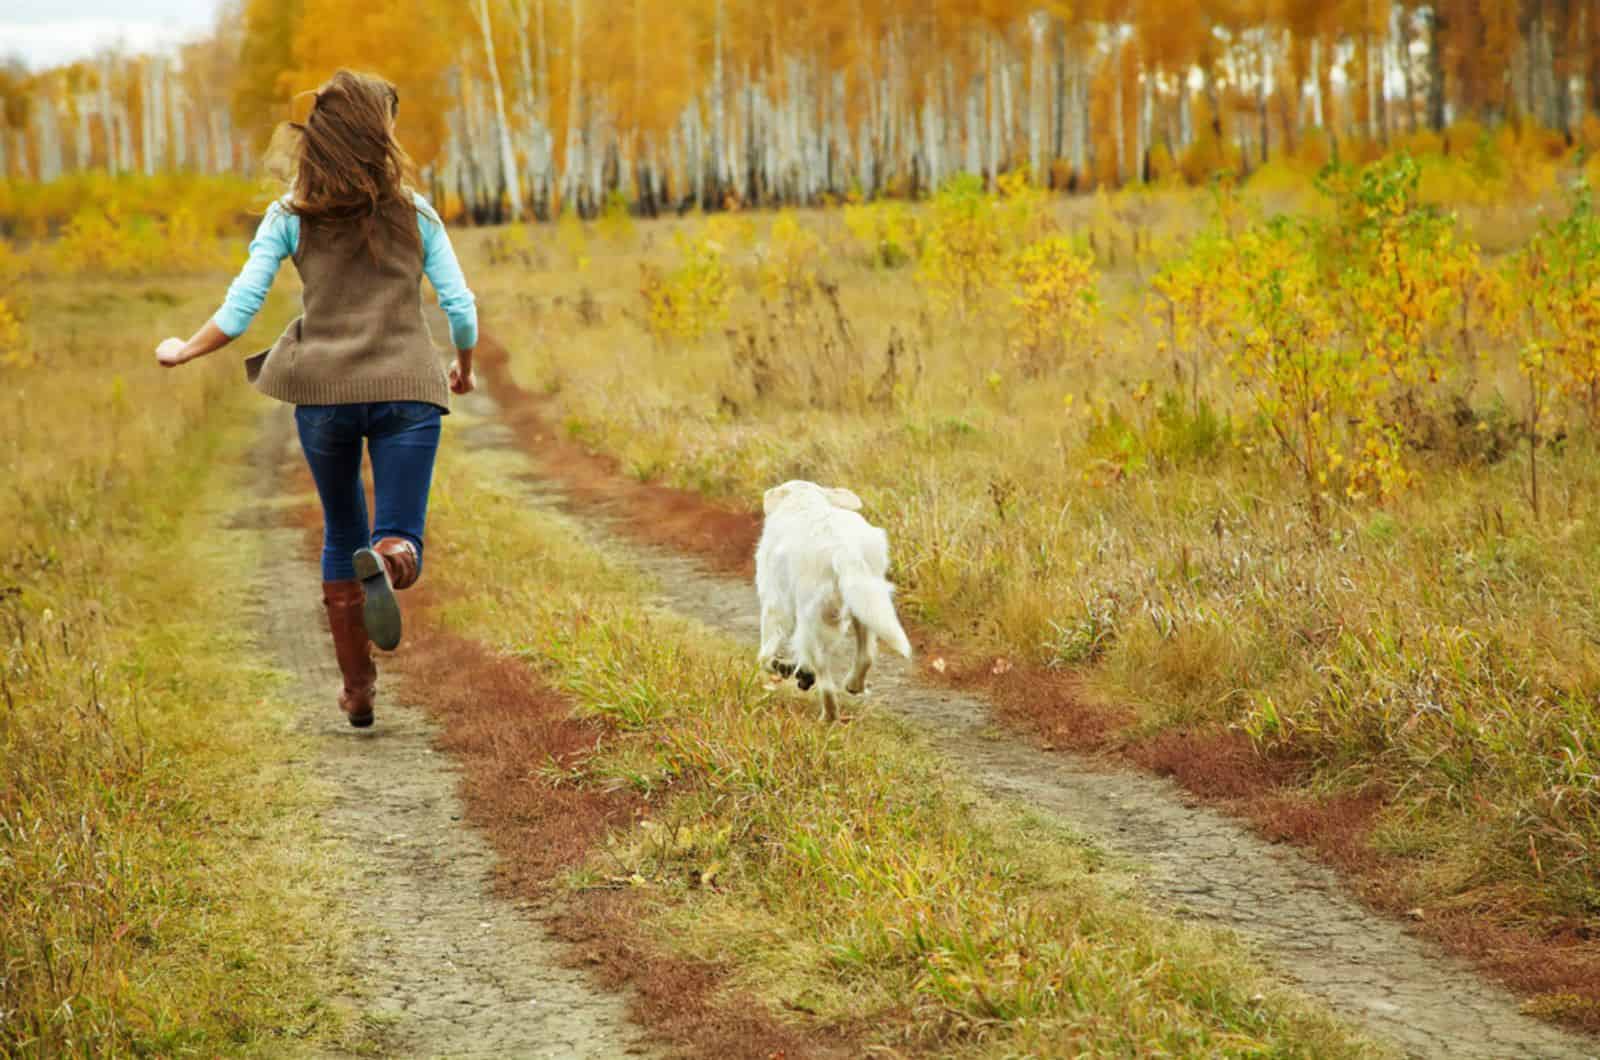 dog running away from a woman in nature